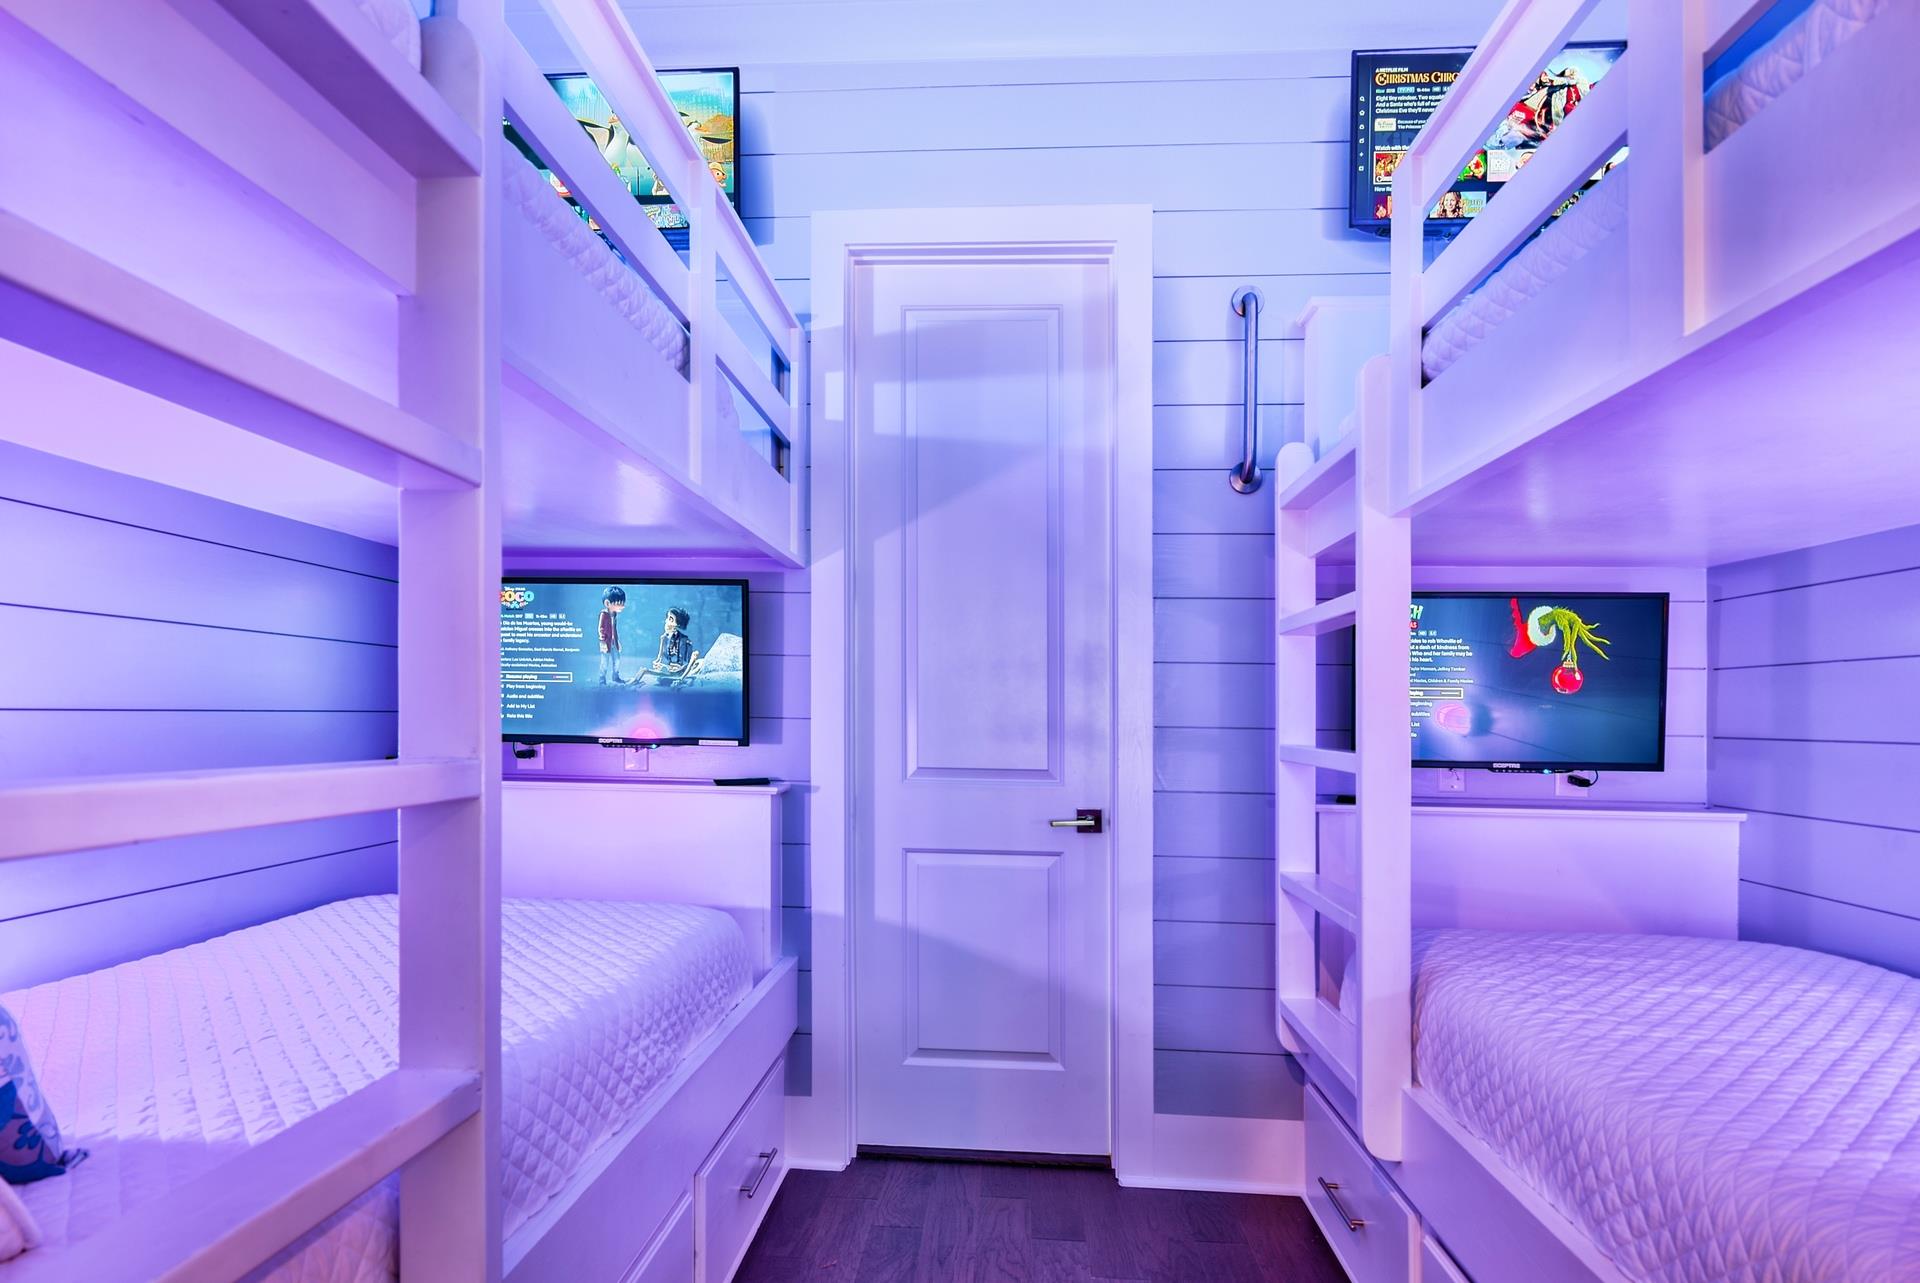 Second floor bunk beds with personal T.V.s